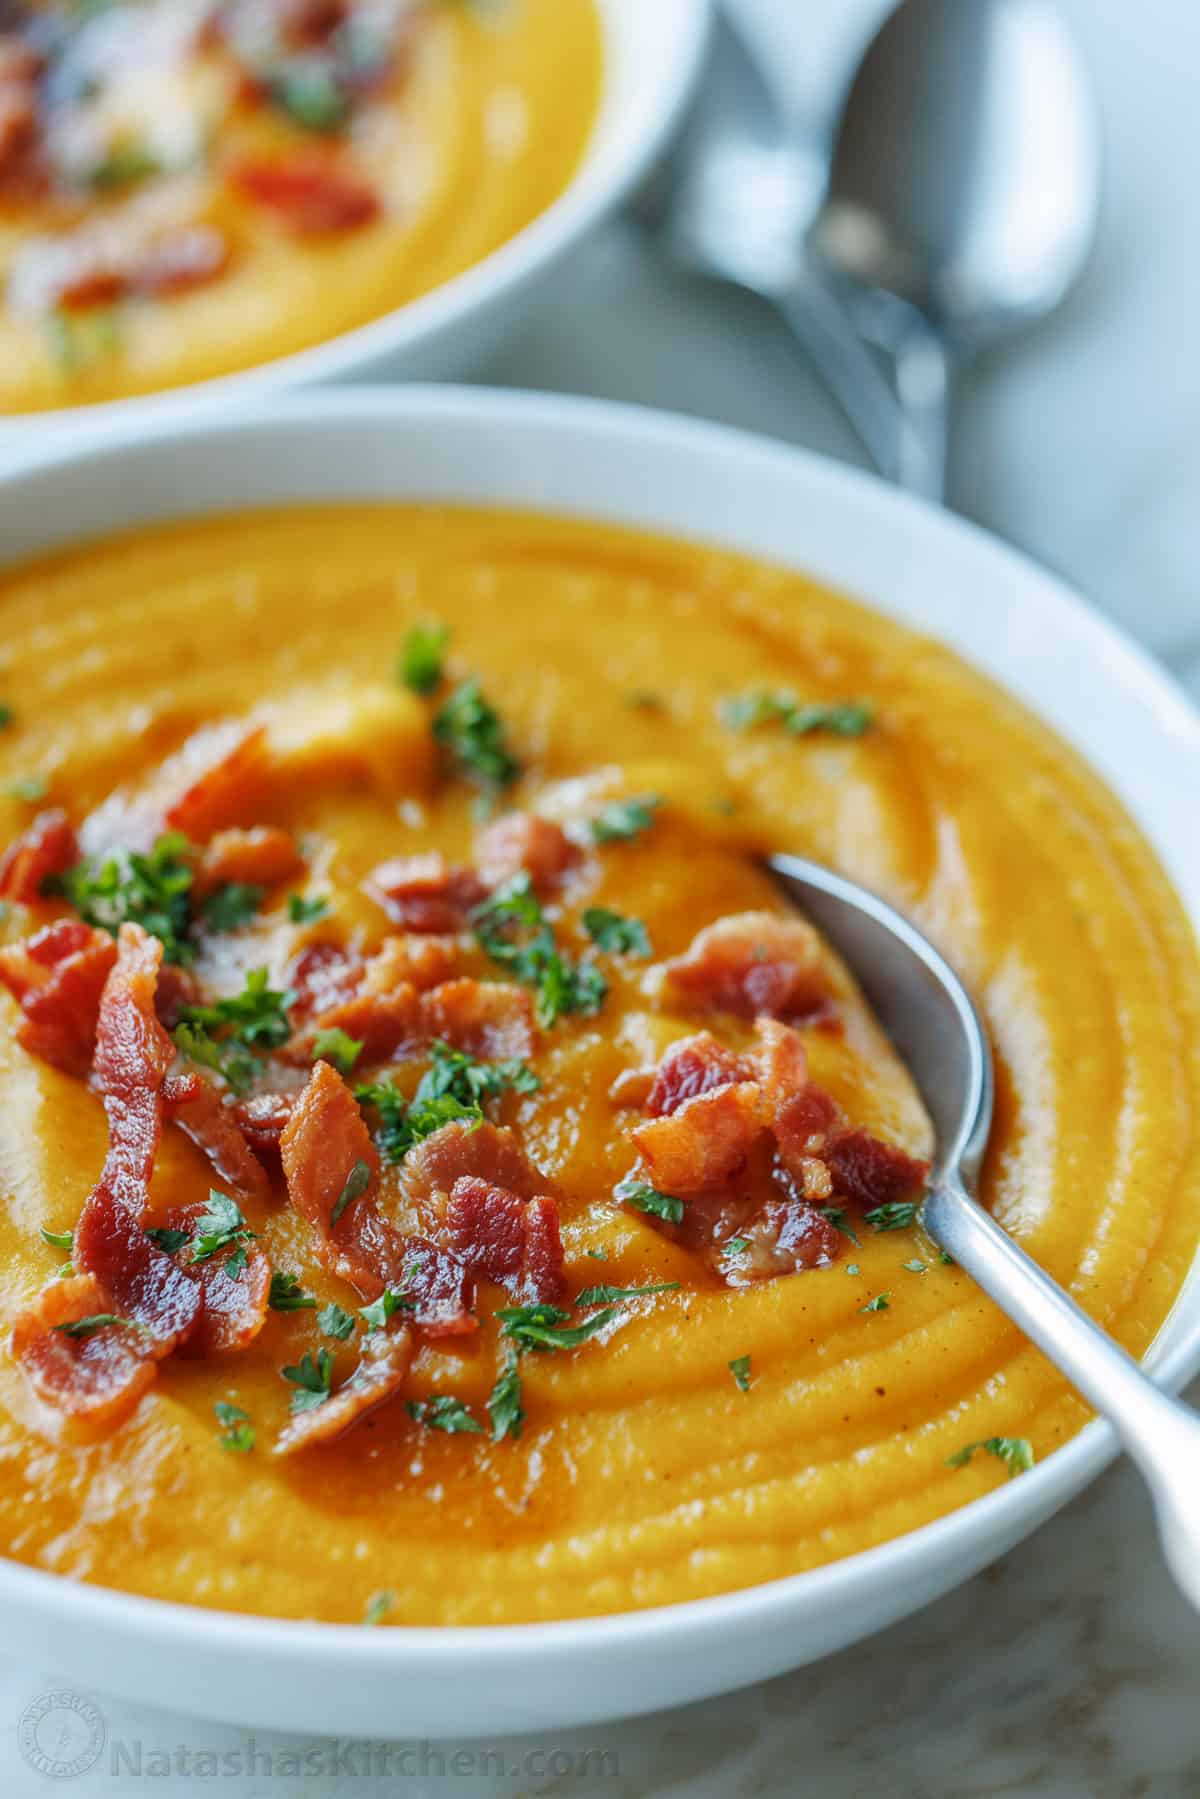 A bowl of homemade butternut squash soup garnished with bacon and parsley, with a spoon.